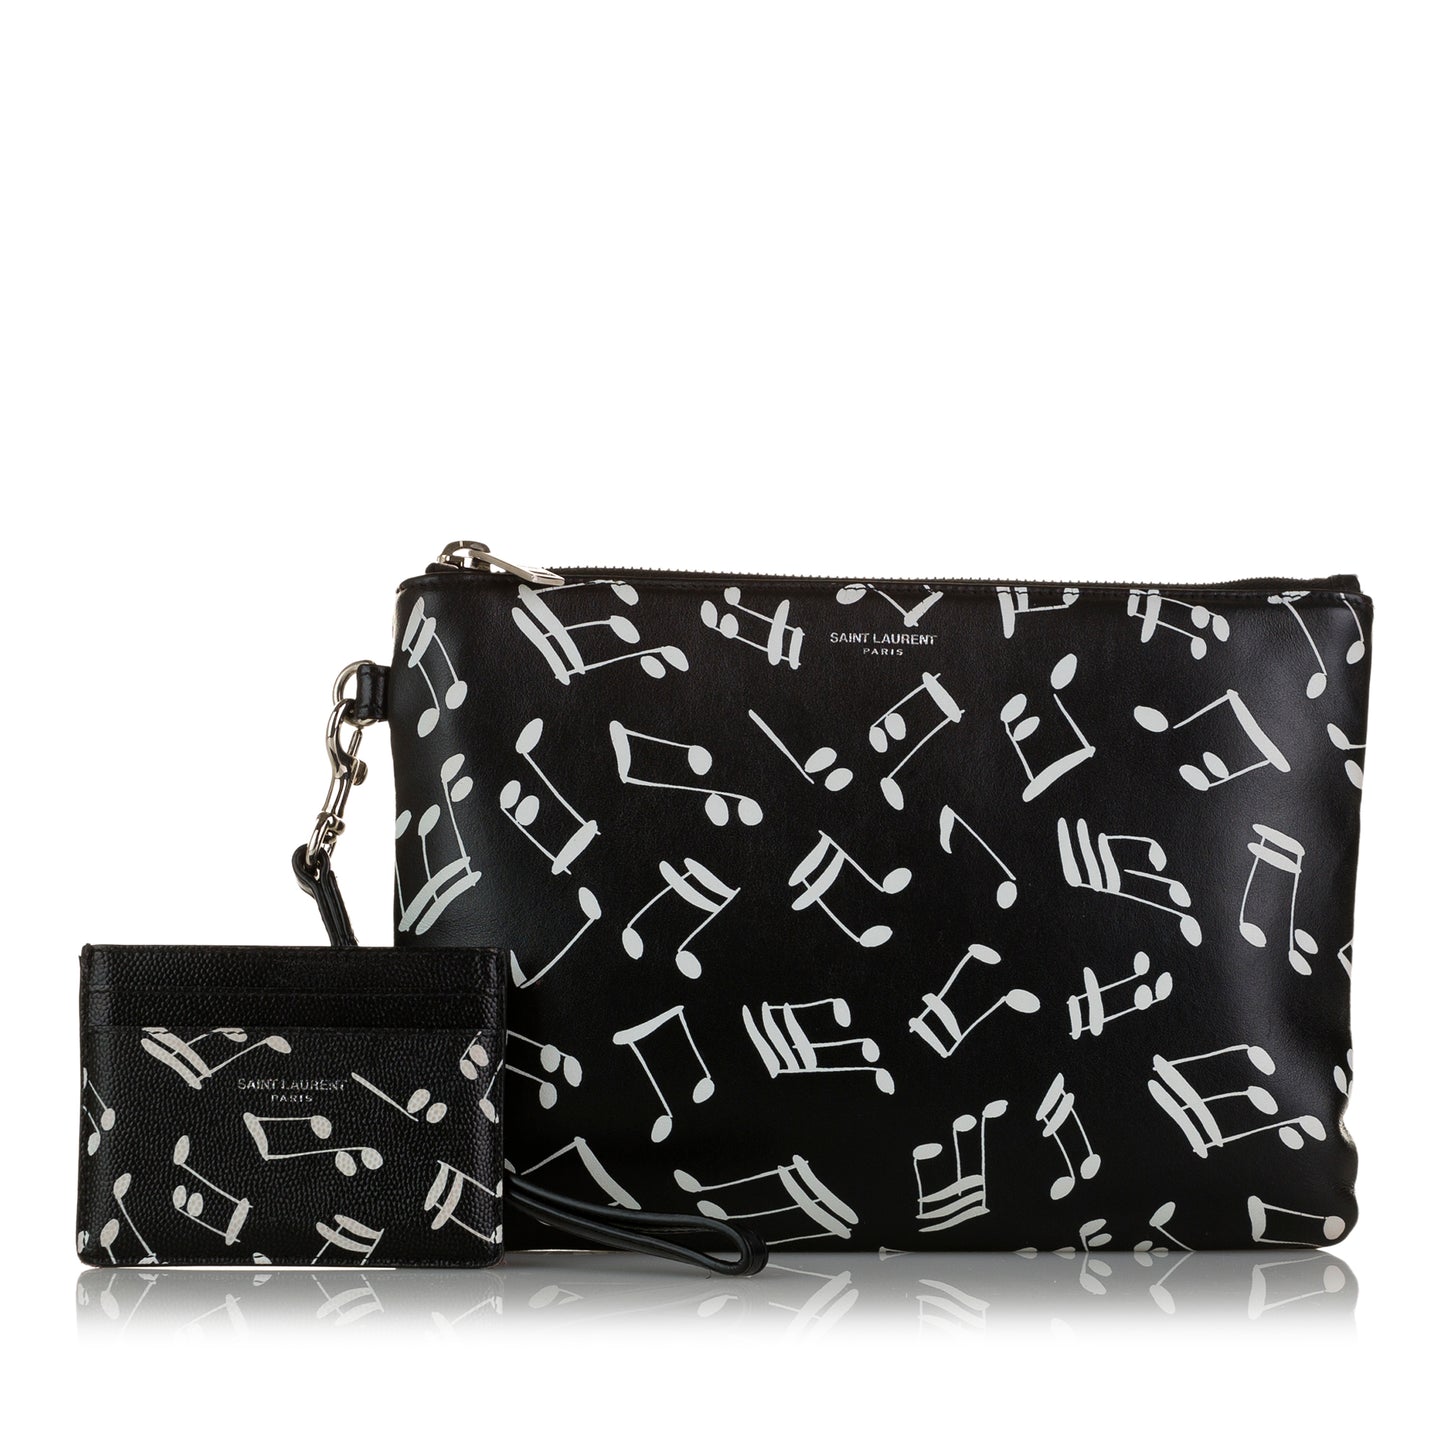 Musical Notes Print Leather Clutch